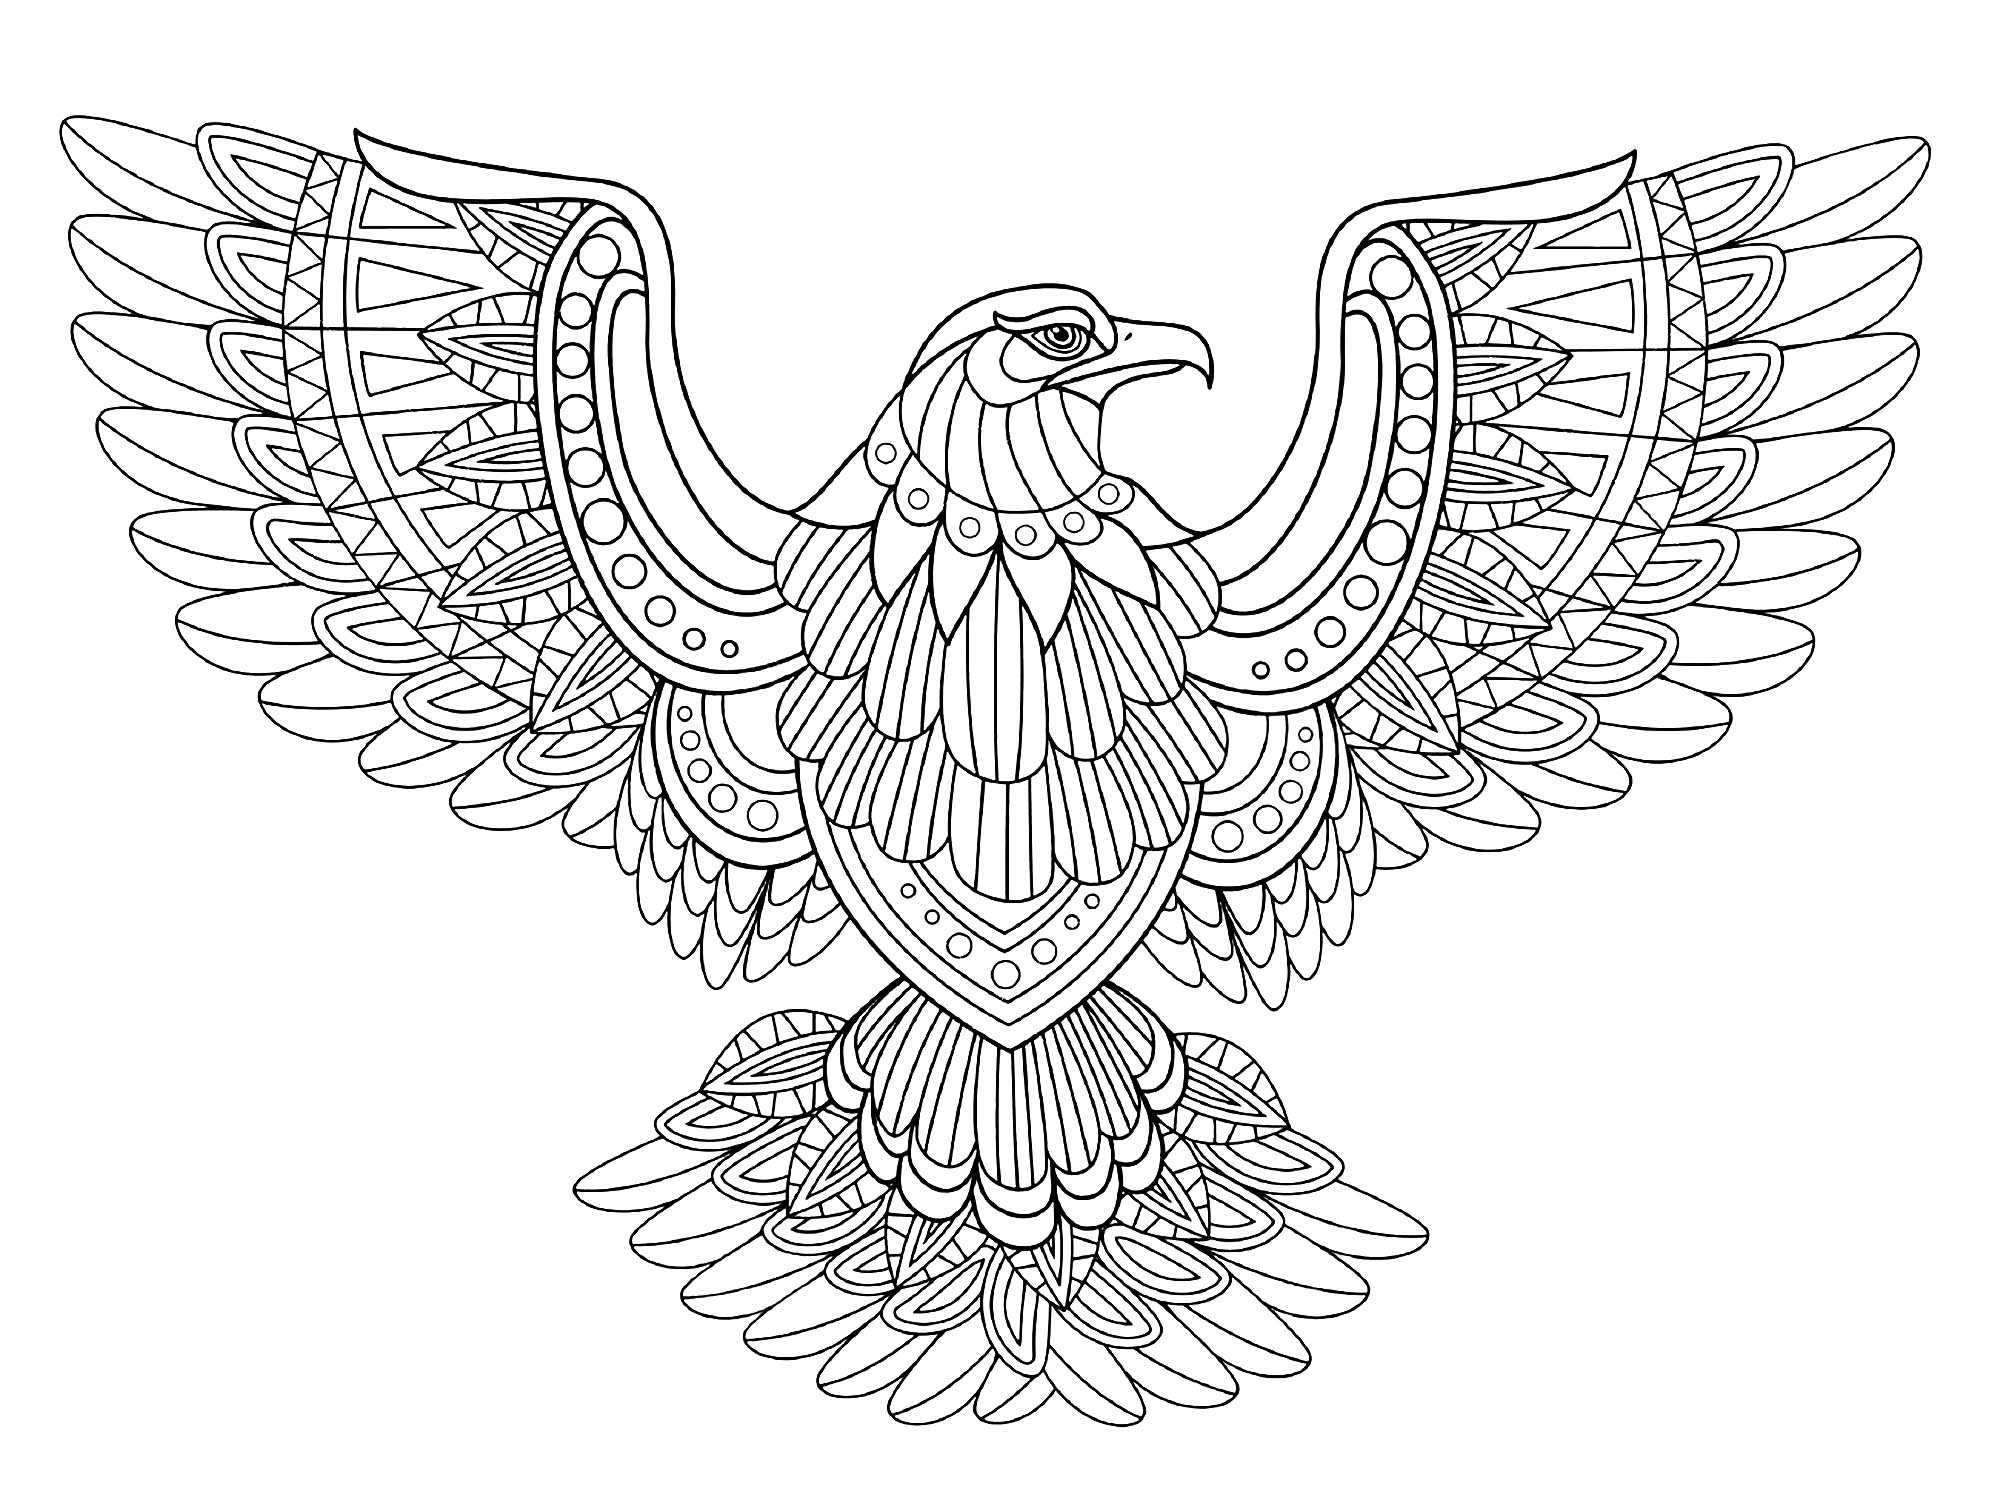 Flying eagle - Birds Adult Coloring Pages